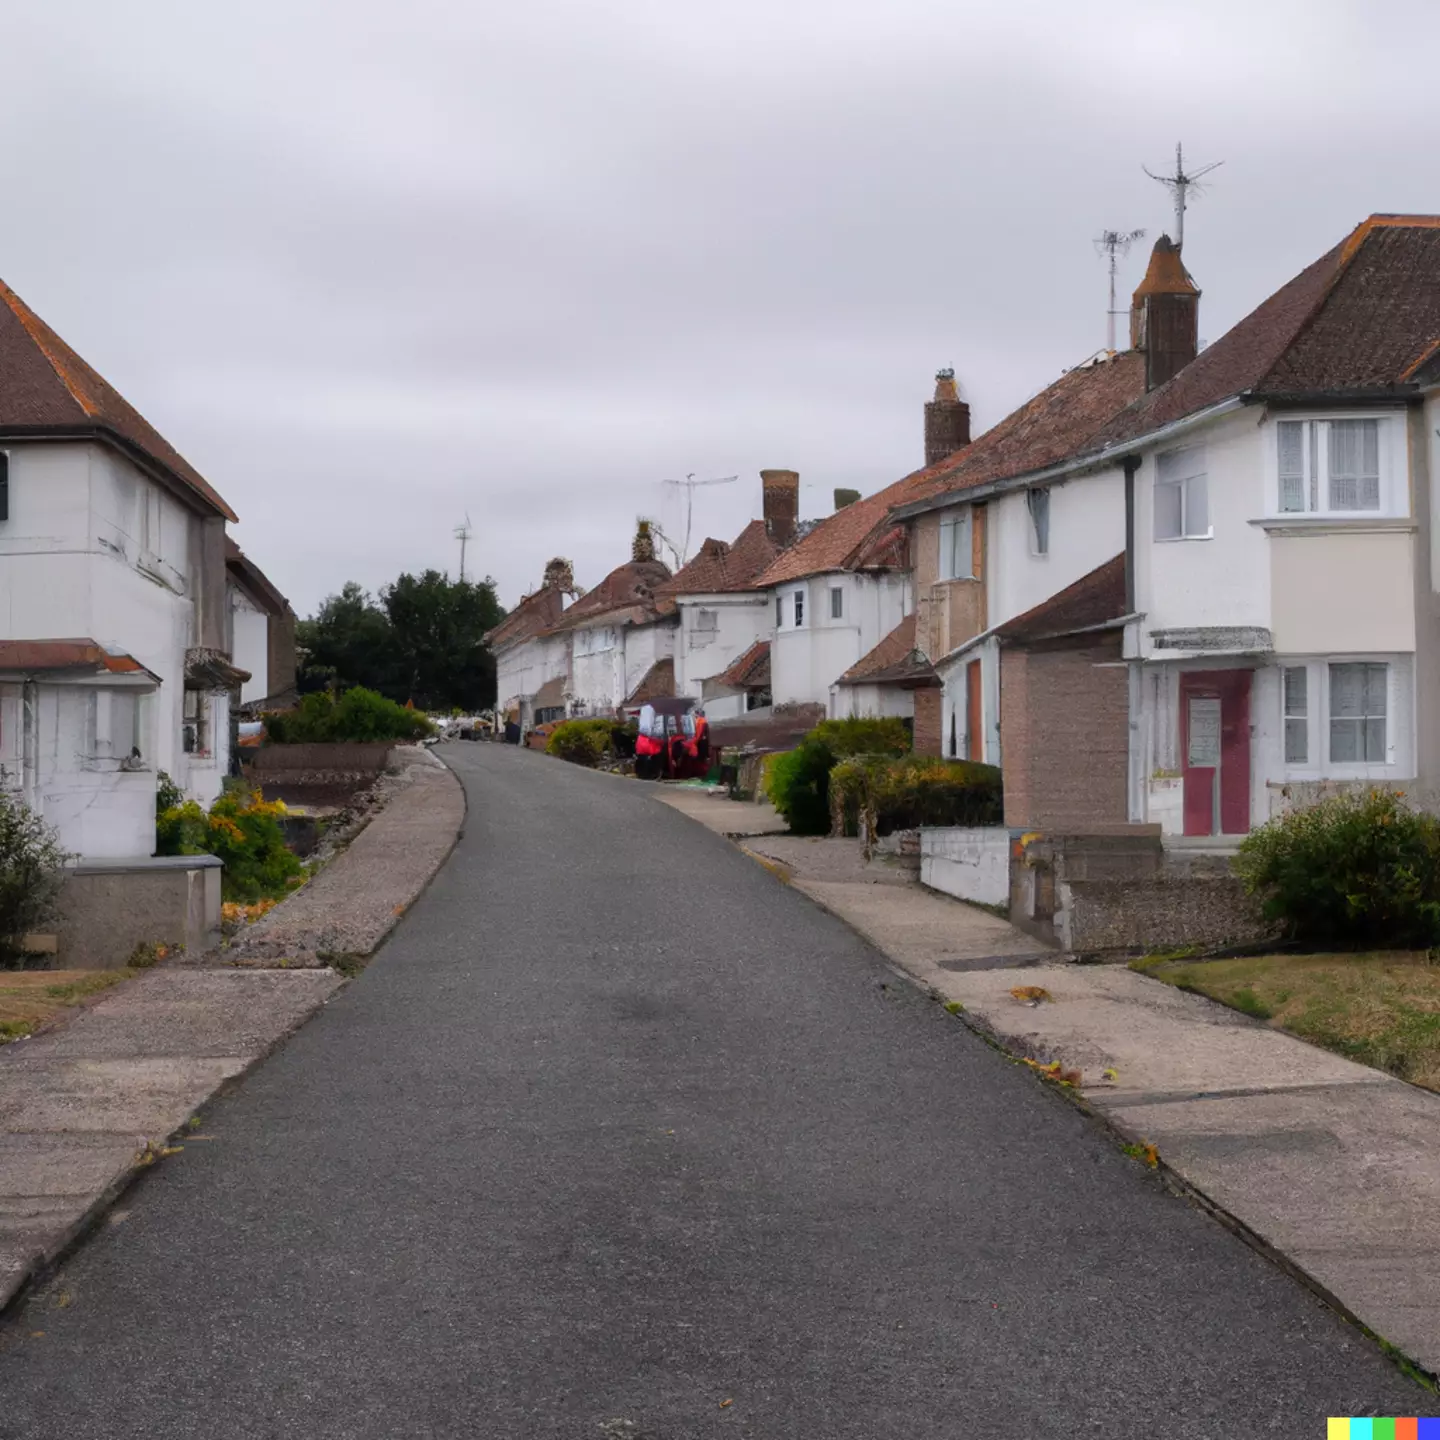 At first, it looks just like a normal British street.